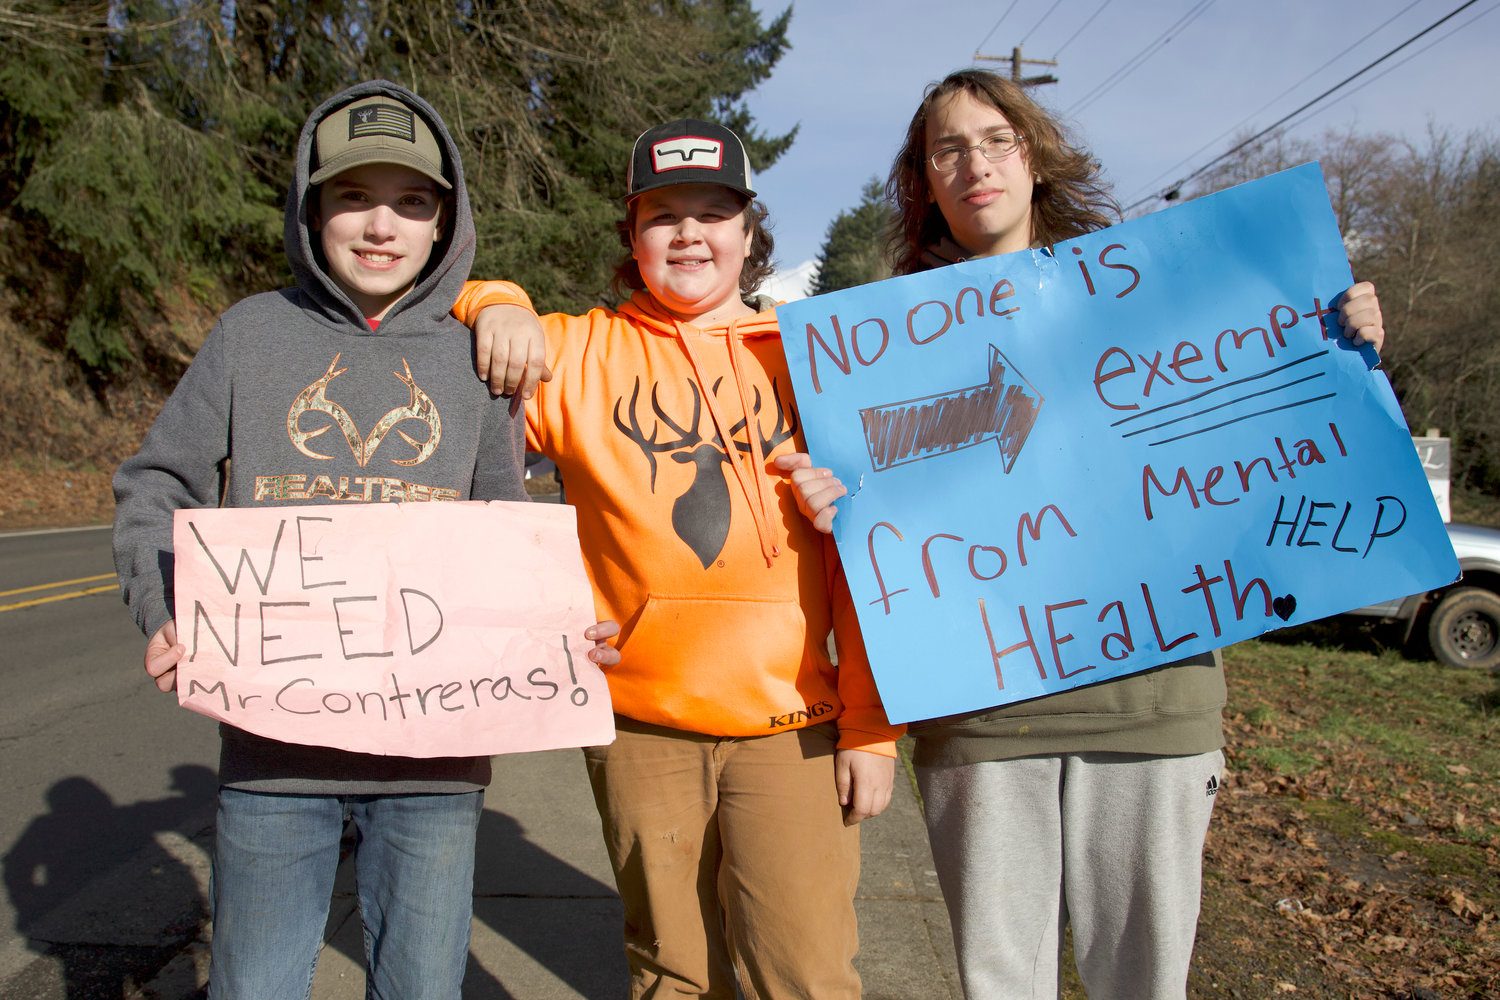 Winlock 6th-grader, Dylin, center, and 8th-graders Tucker and Xavier stand with their signs protesting Winlock School District counselor layoffs Wednesday afternoon in Winlock.